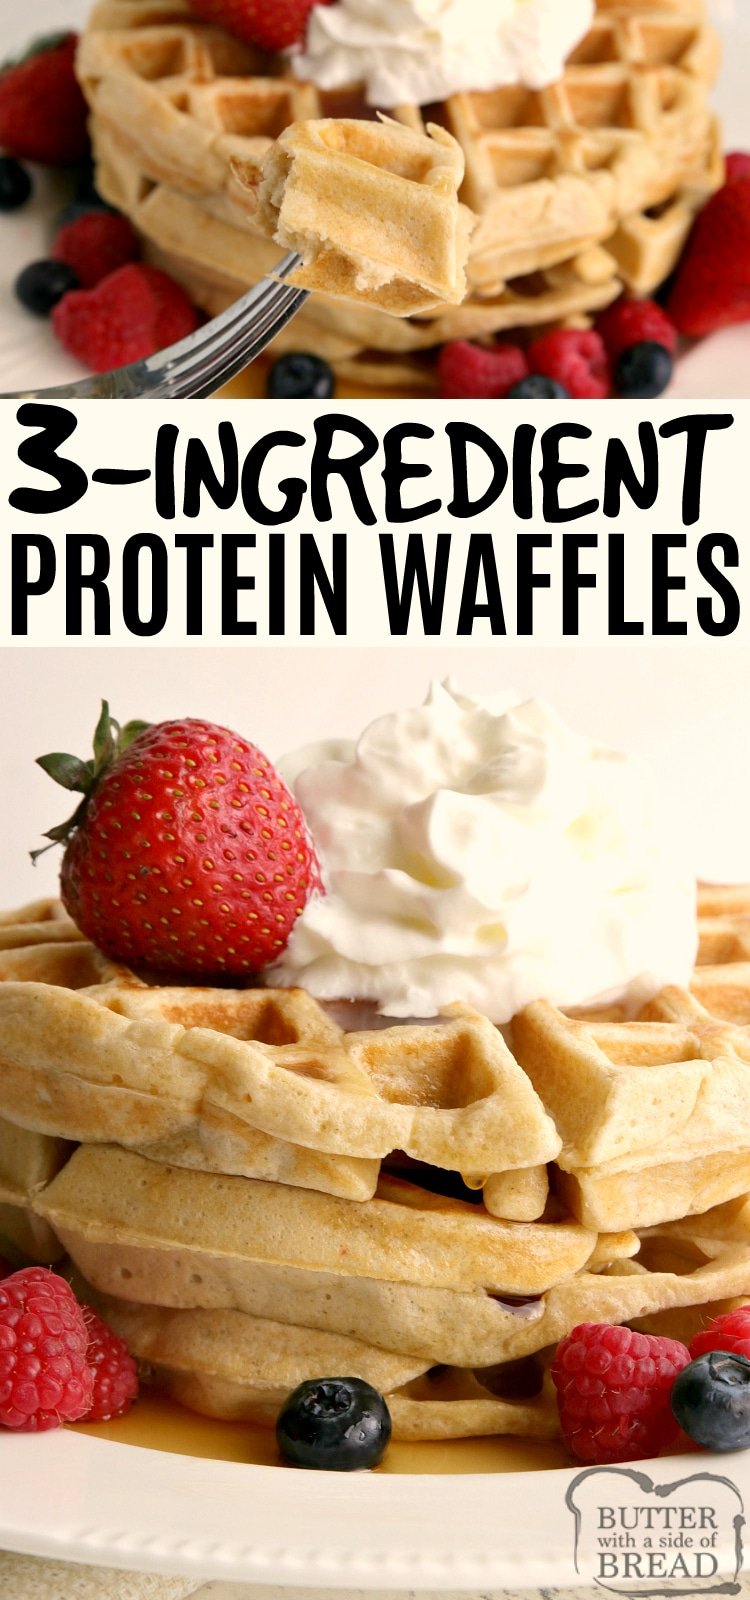 High Protein Waffle recipe made with eggs, oats and cottage cheese. Delicious protein waffles with only 3 simple ingredients! Easy breakfast recipe that is high in protein and gluten-free too, no protein powder needed! 